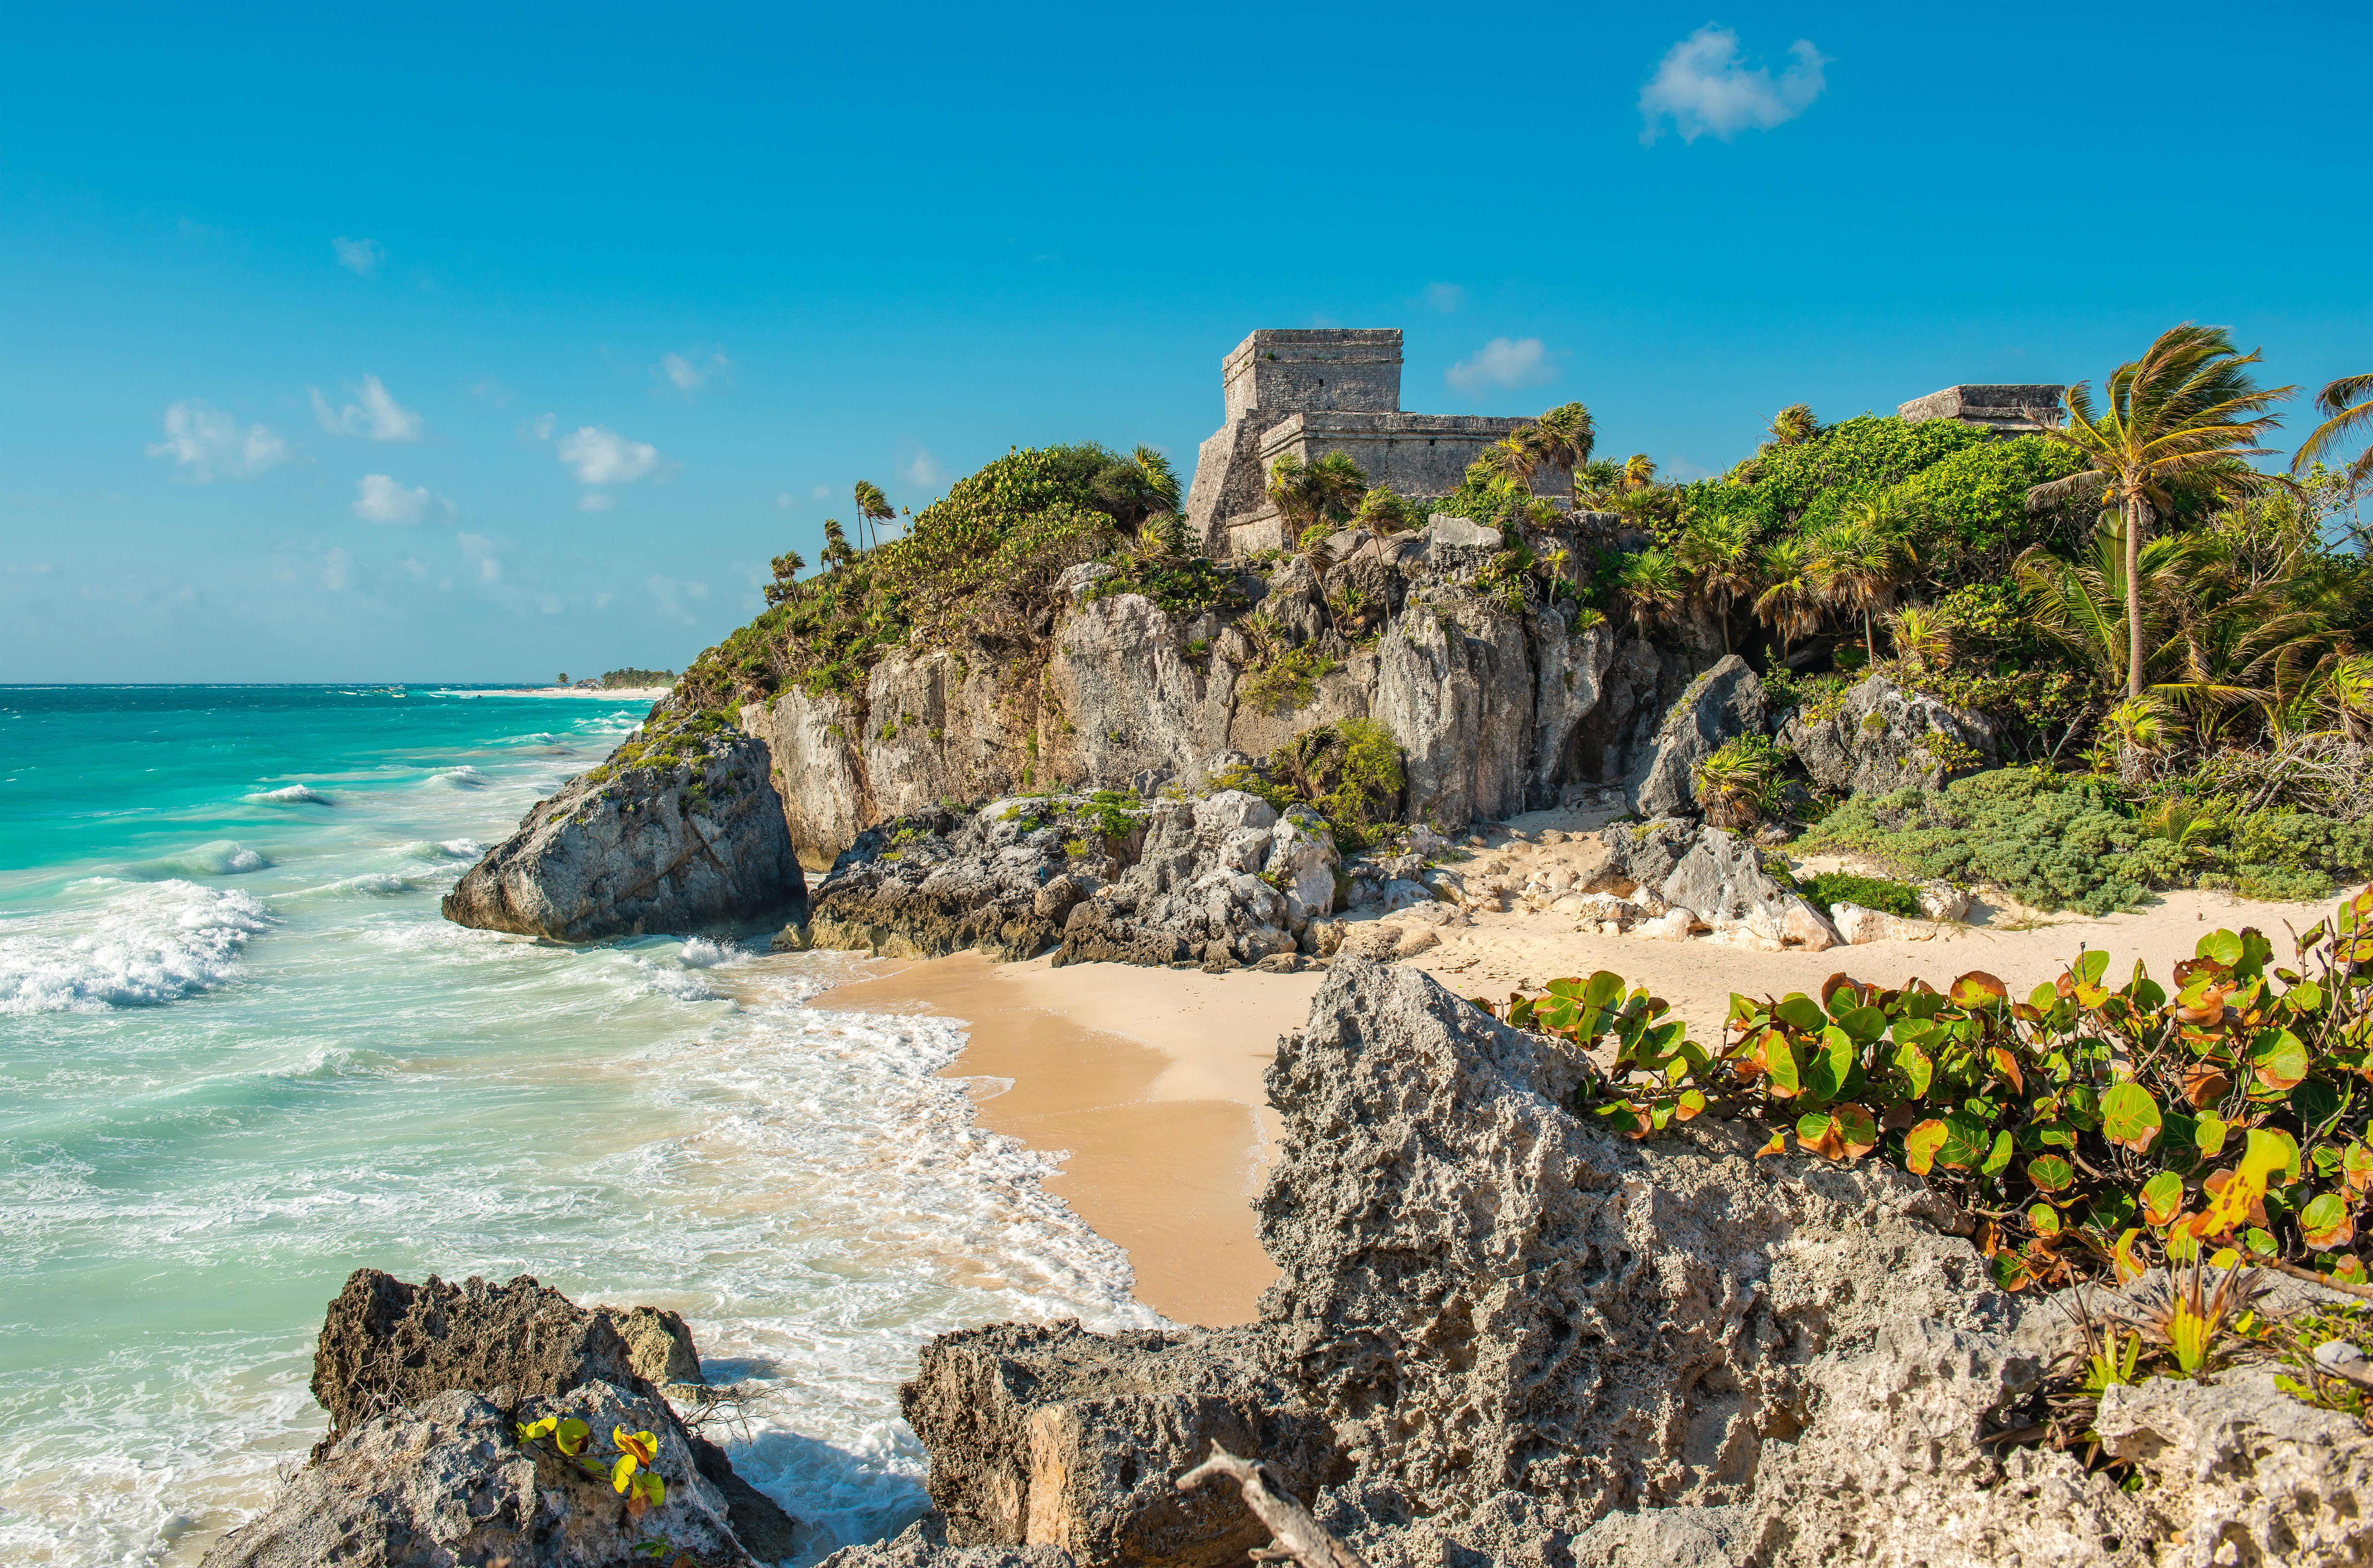 How Expensive Is Tulum? - A Visual Odyssey Through Mayan Ruins, Pristine Beaches, And Verdant Jungles